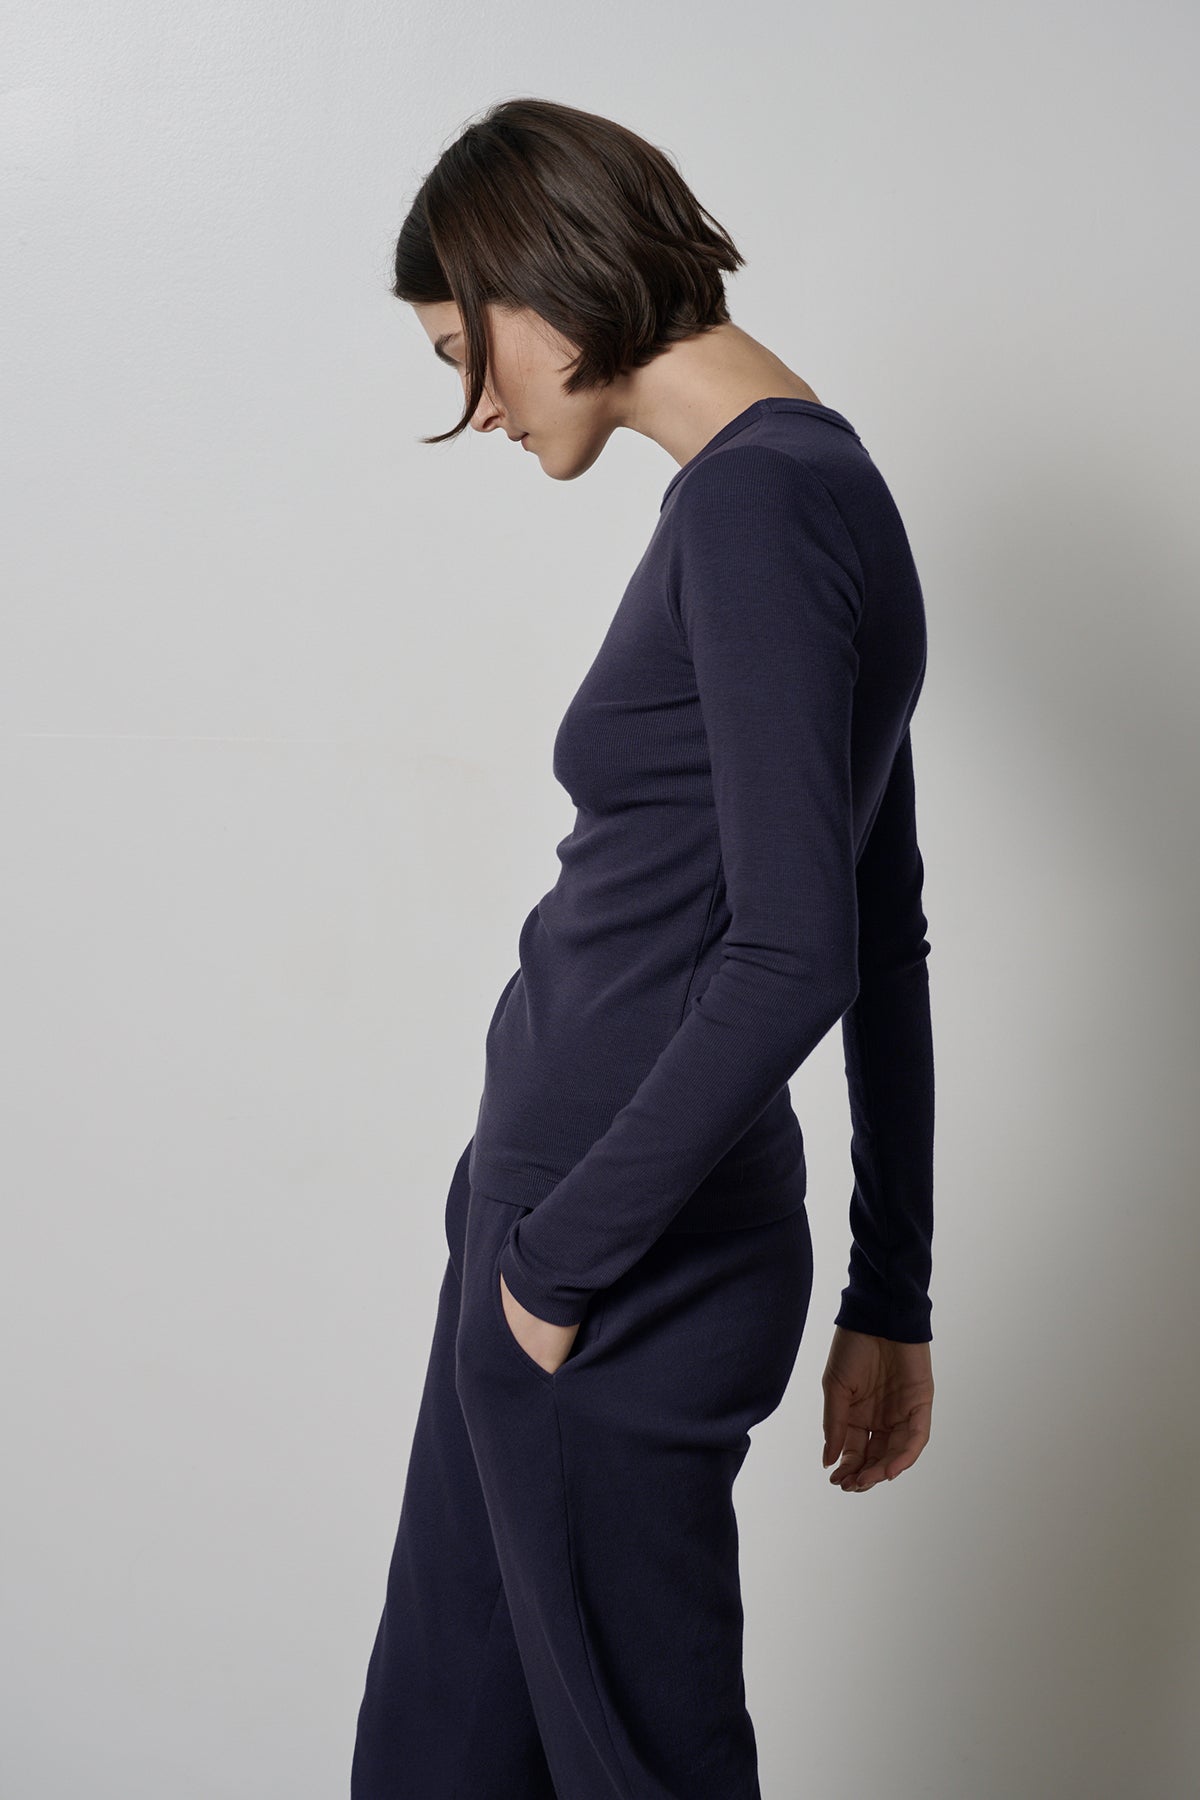 The model is wearing a navy long-sleeved CAMINO TEE and pants by Velvet by Jenny Graham, offering ultimate comfort.-35547425800385